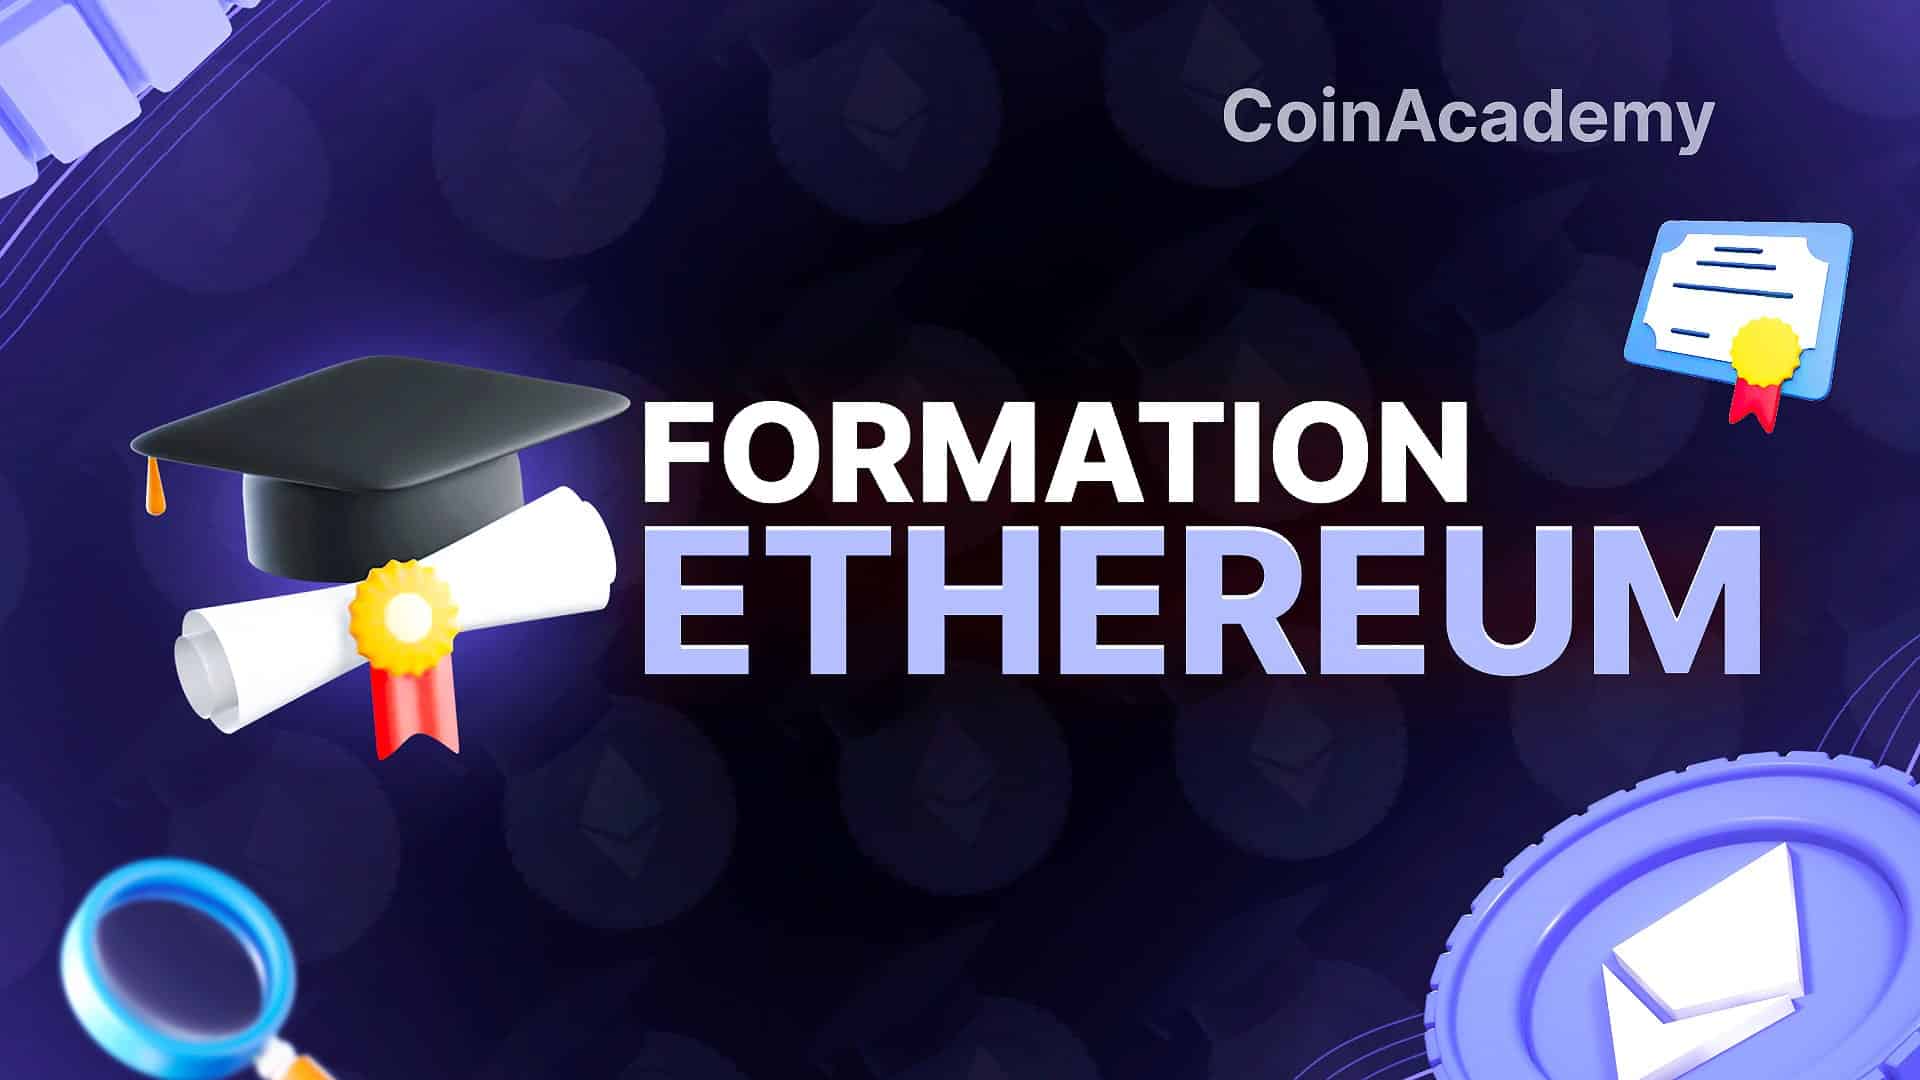 Formation Ethereum CoinAcademy